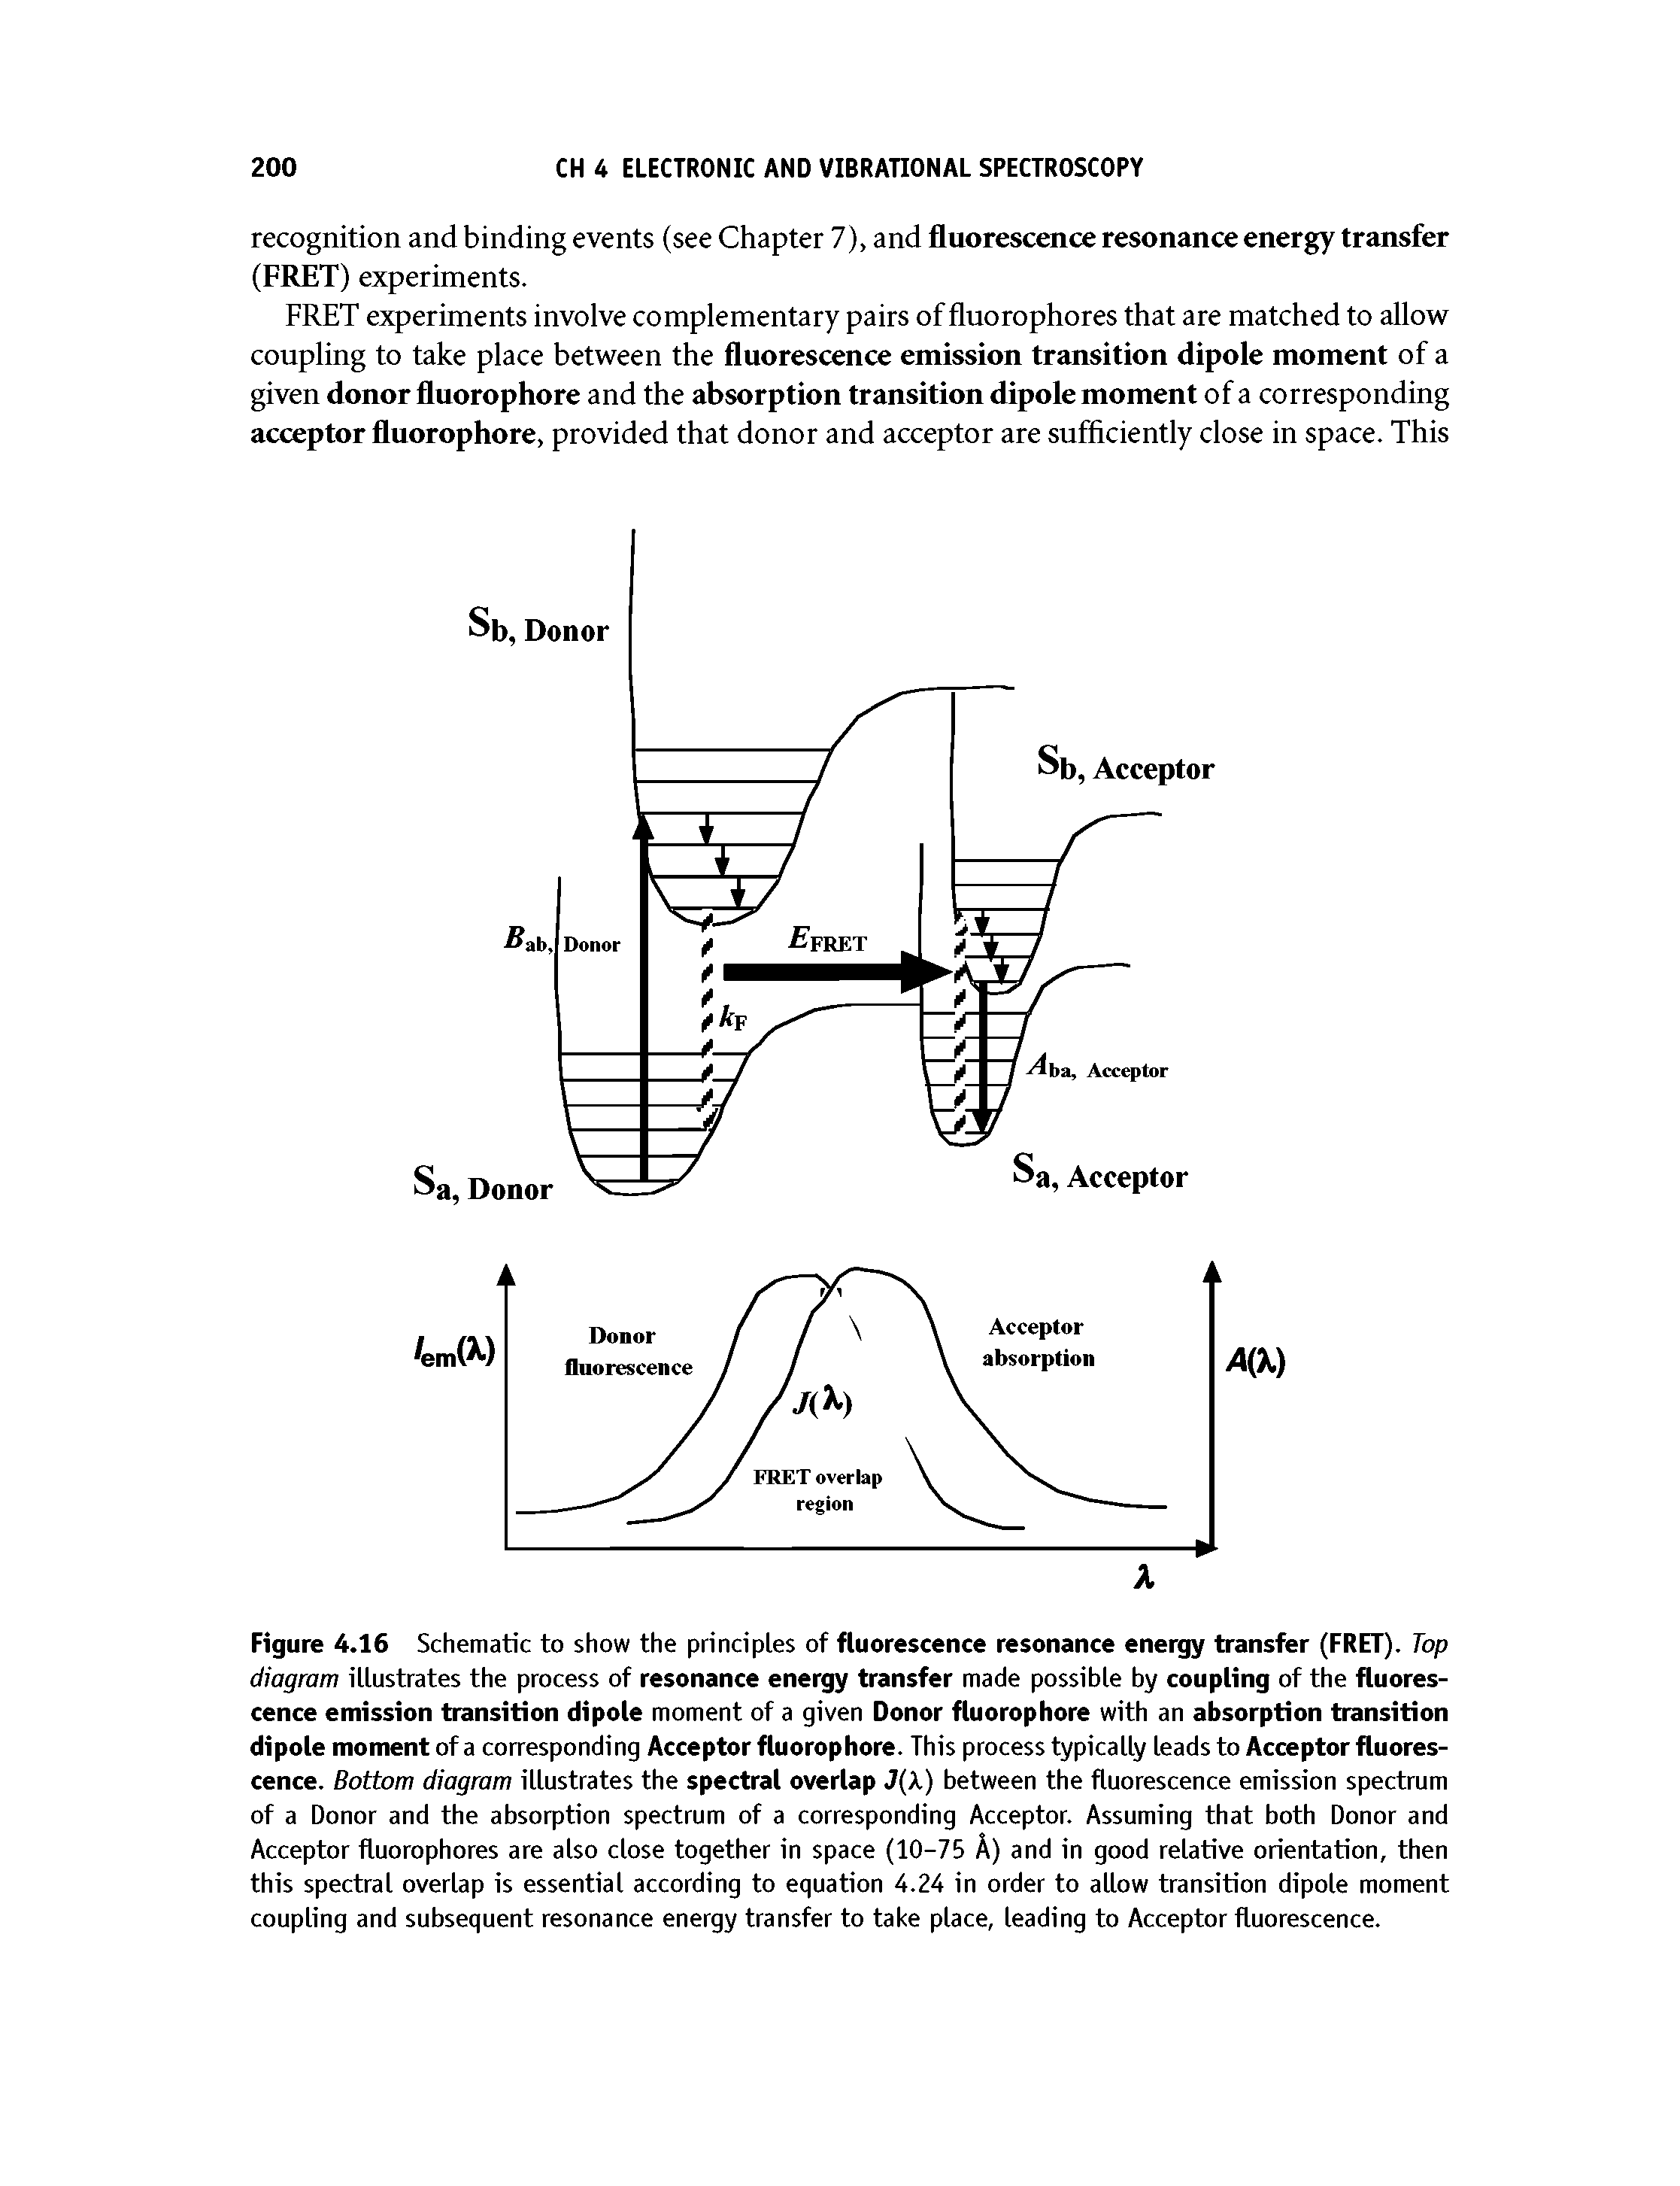 Figure 4.16 Schematic to show the principles of fluorescence resonance energy transfer (FRET). Top...